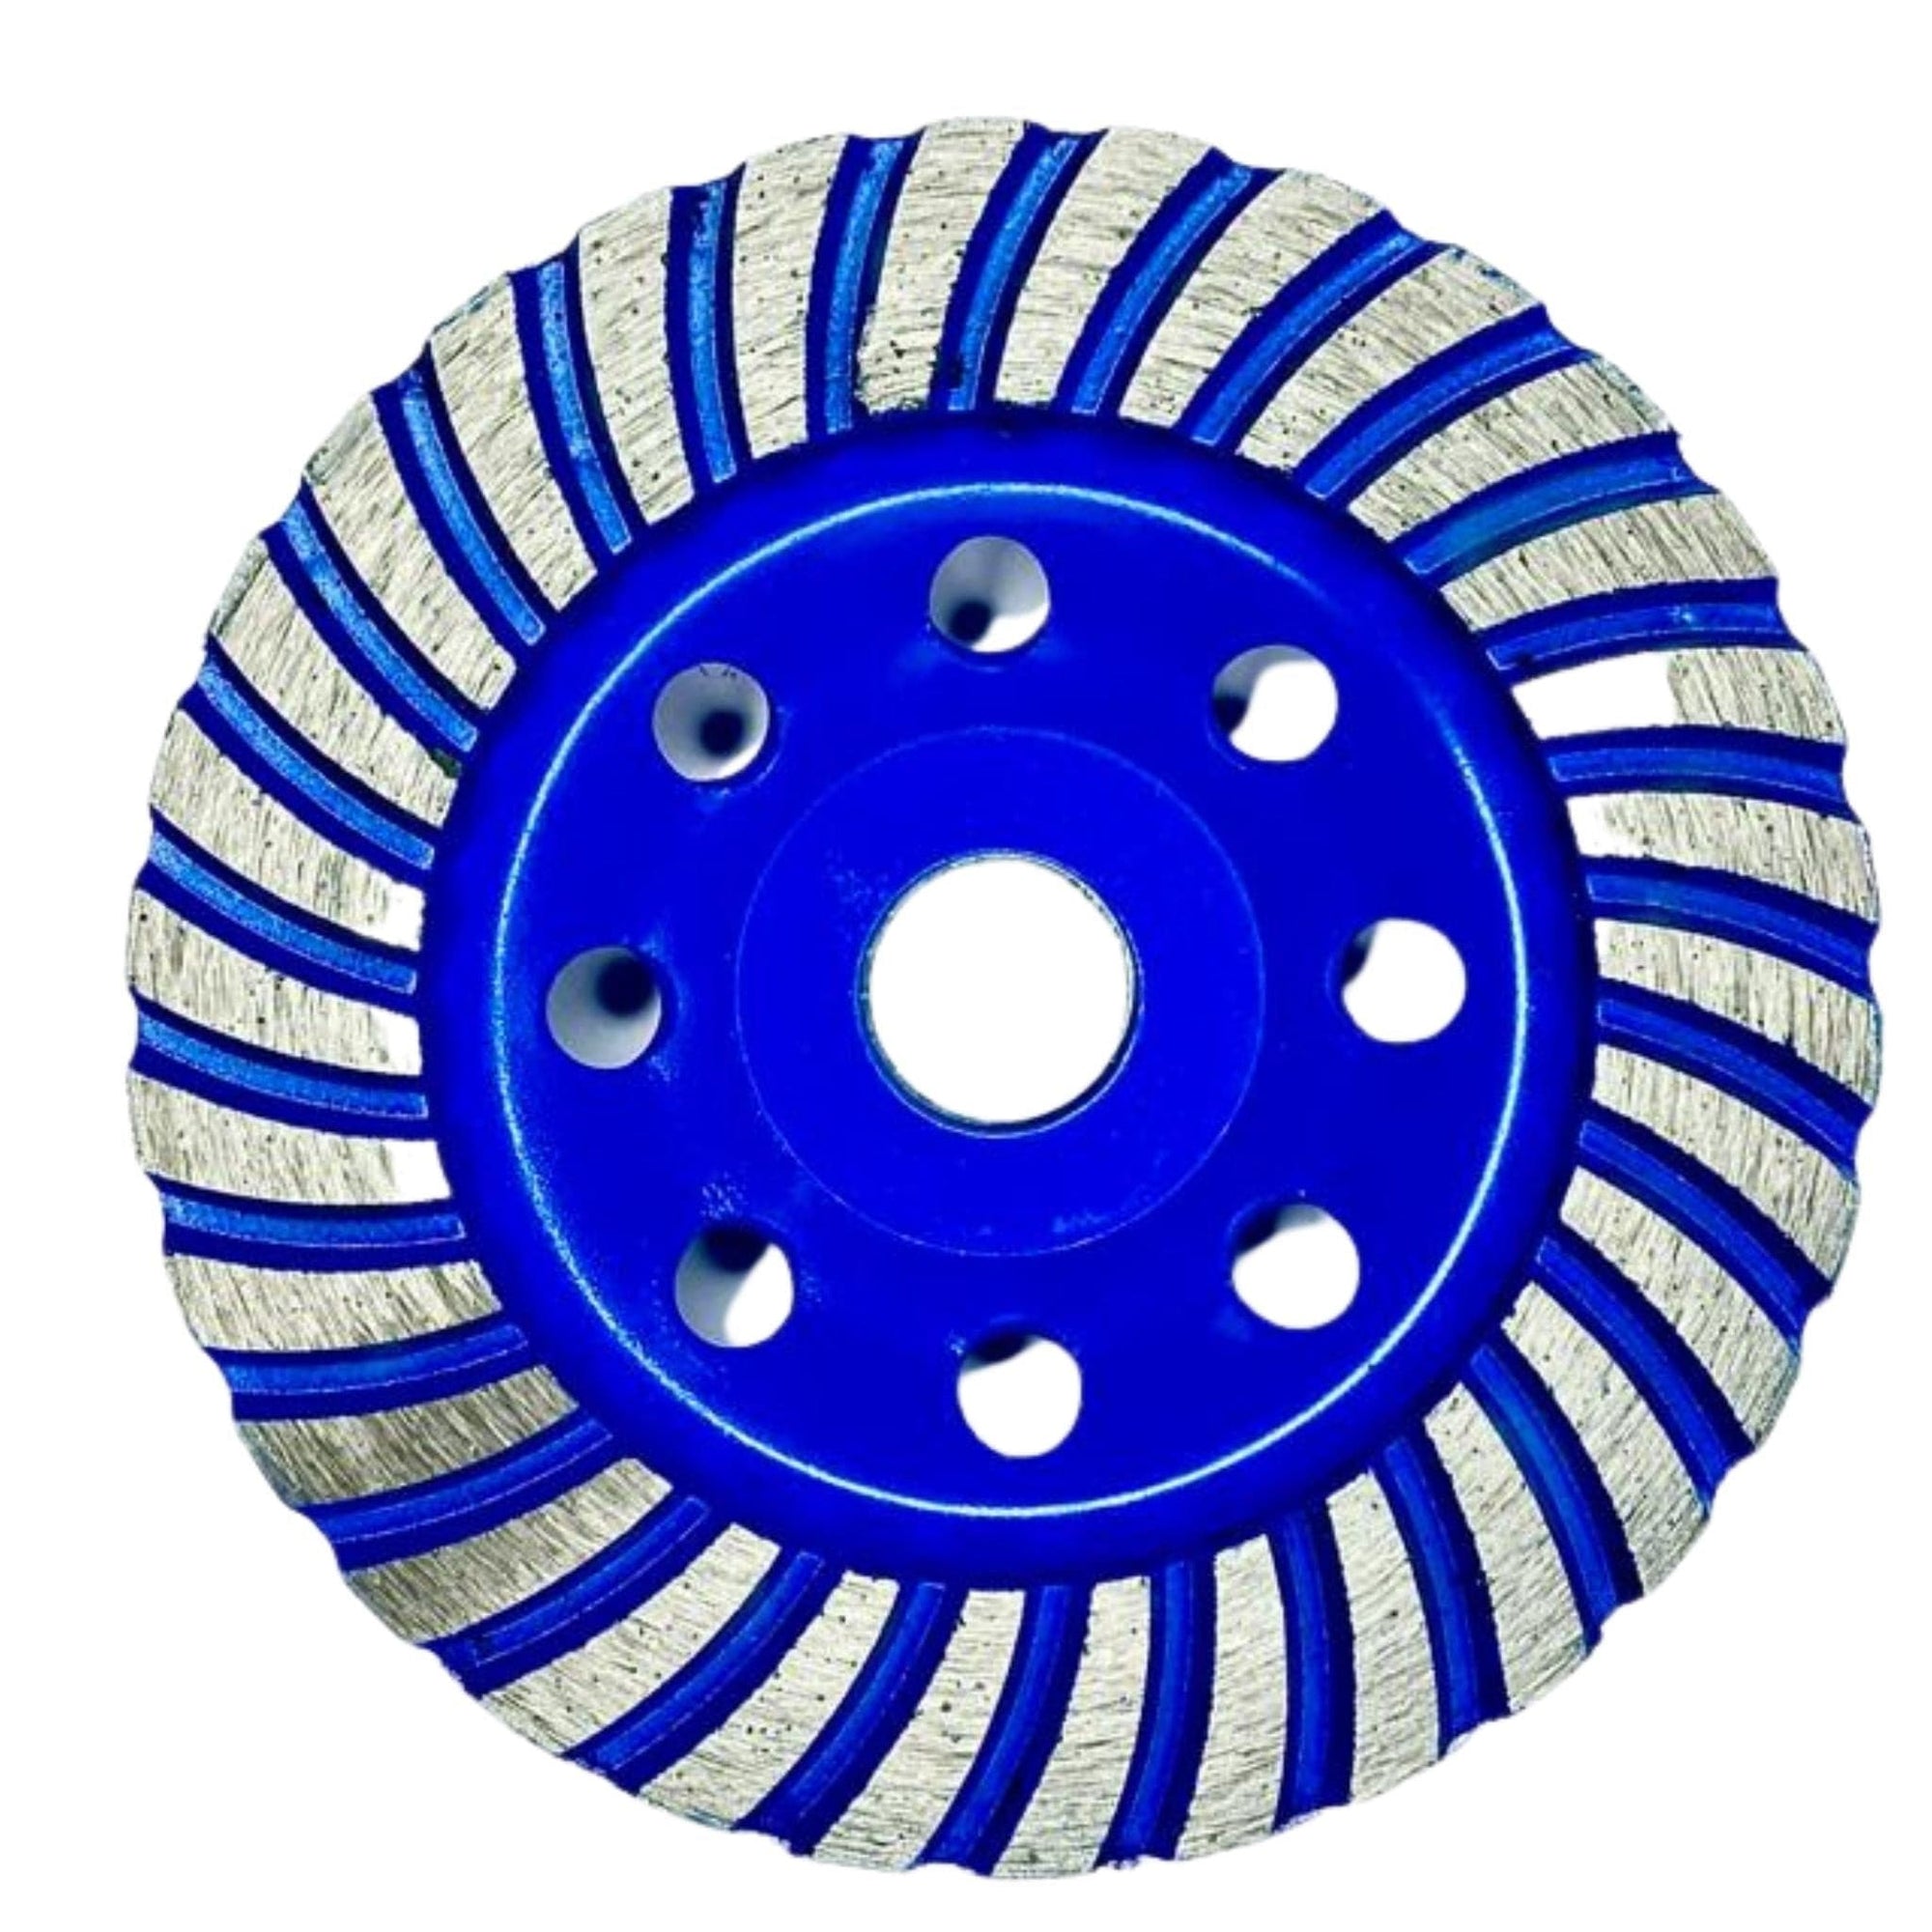 100mm (4") concrete grinding disc - South East Clearance Centre